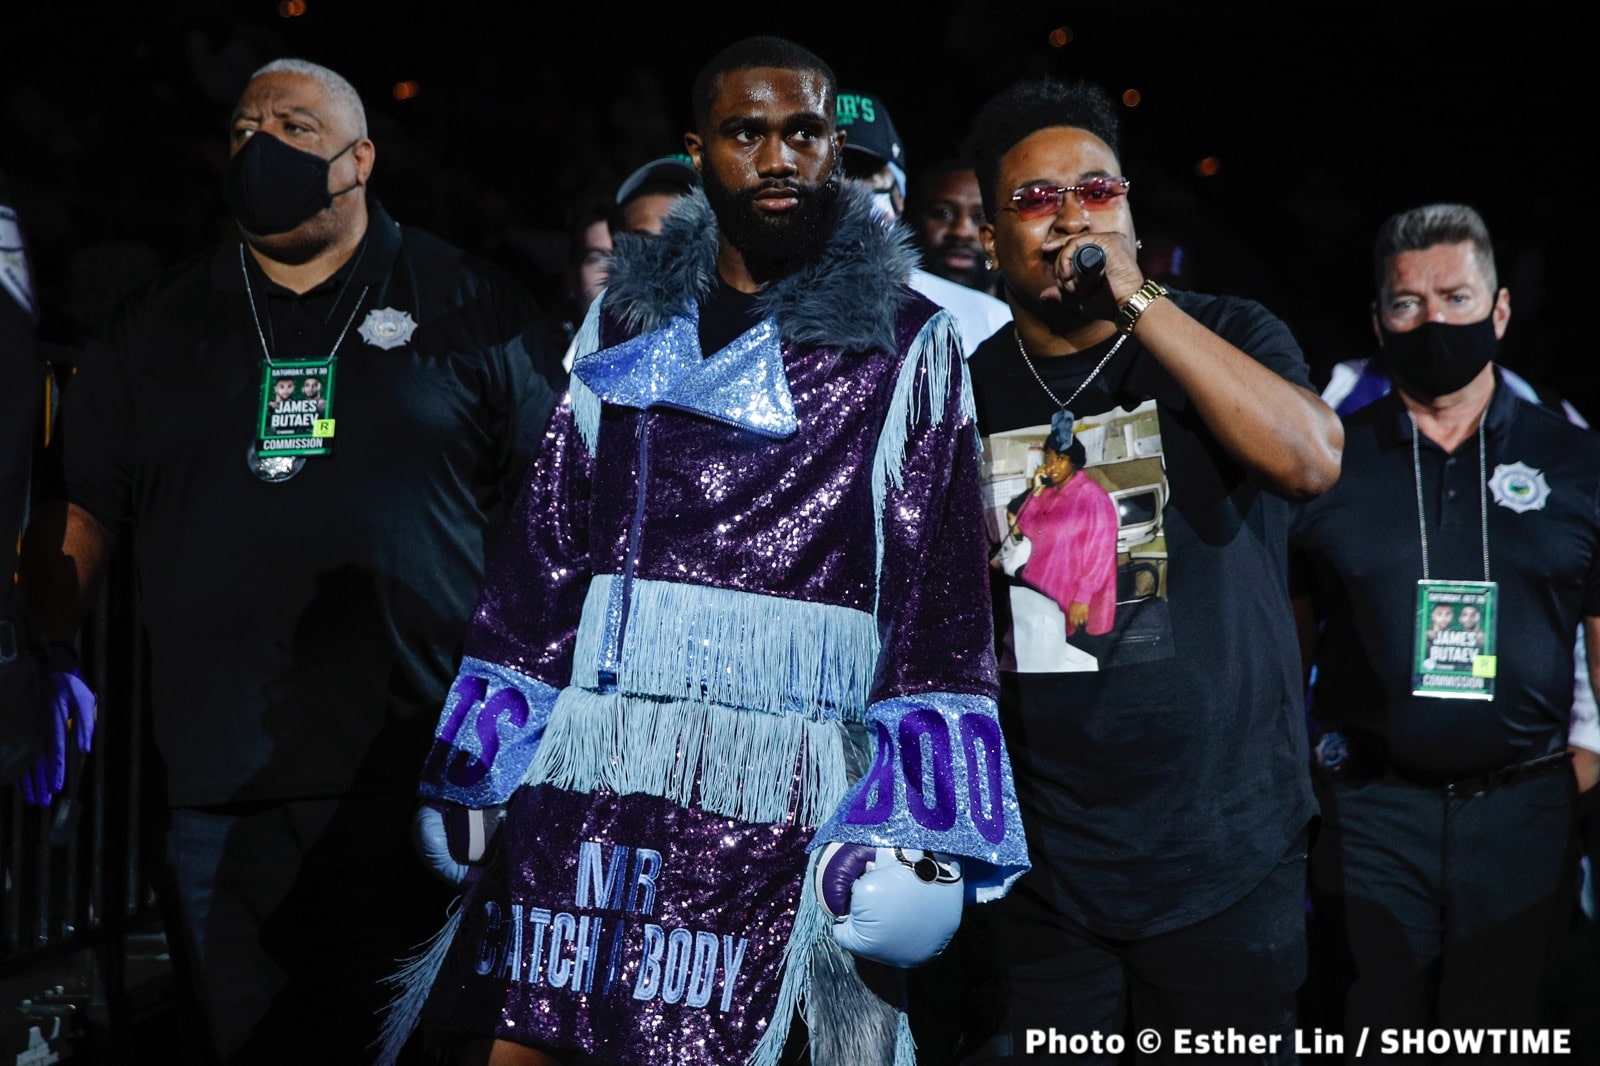 Terence Crawford, Keith Thurman boxing photo